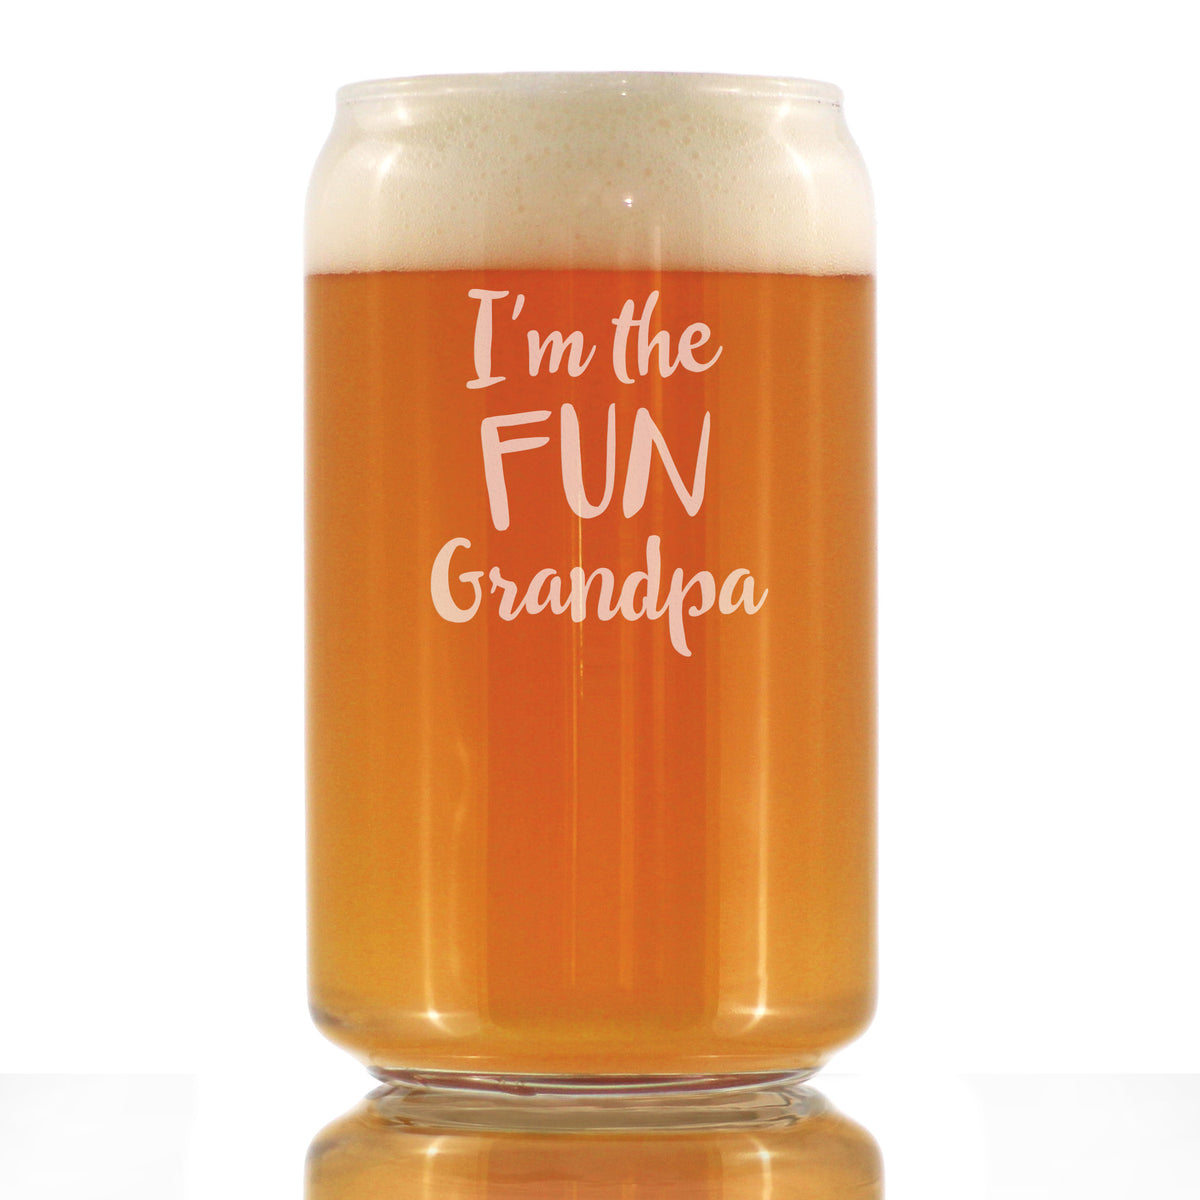 Fun Grandpa - Funny Beer Can Pint Glass Glass Gift for Grandfathers - 16 Oz Glasses for Lagers and Ales